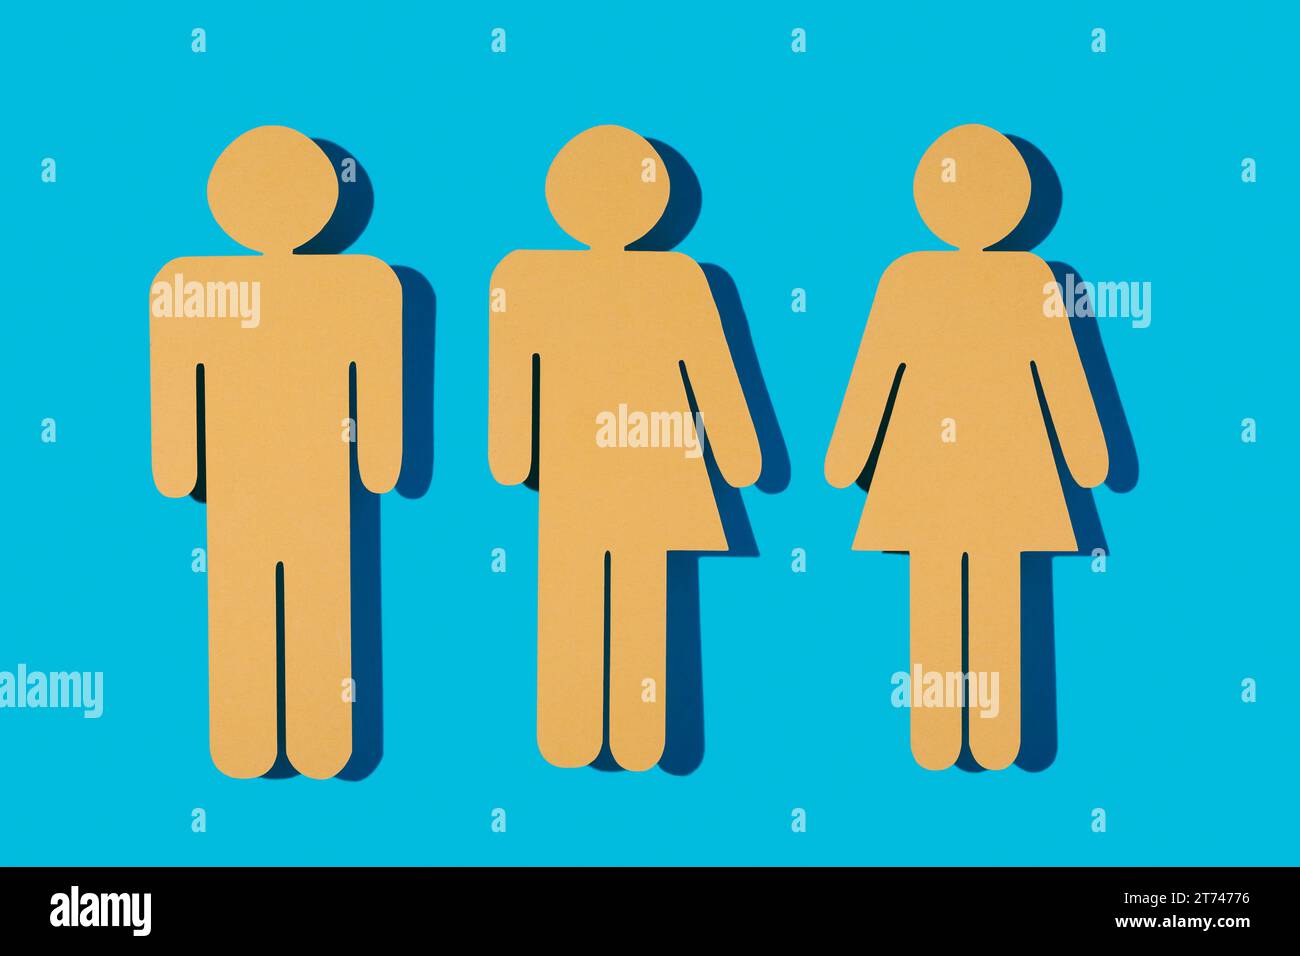 three yellow gender icons on a blue background, a male gender icon, a gender neutral icon and a female gender icon Stock Photo